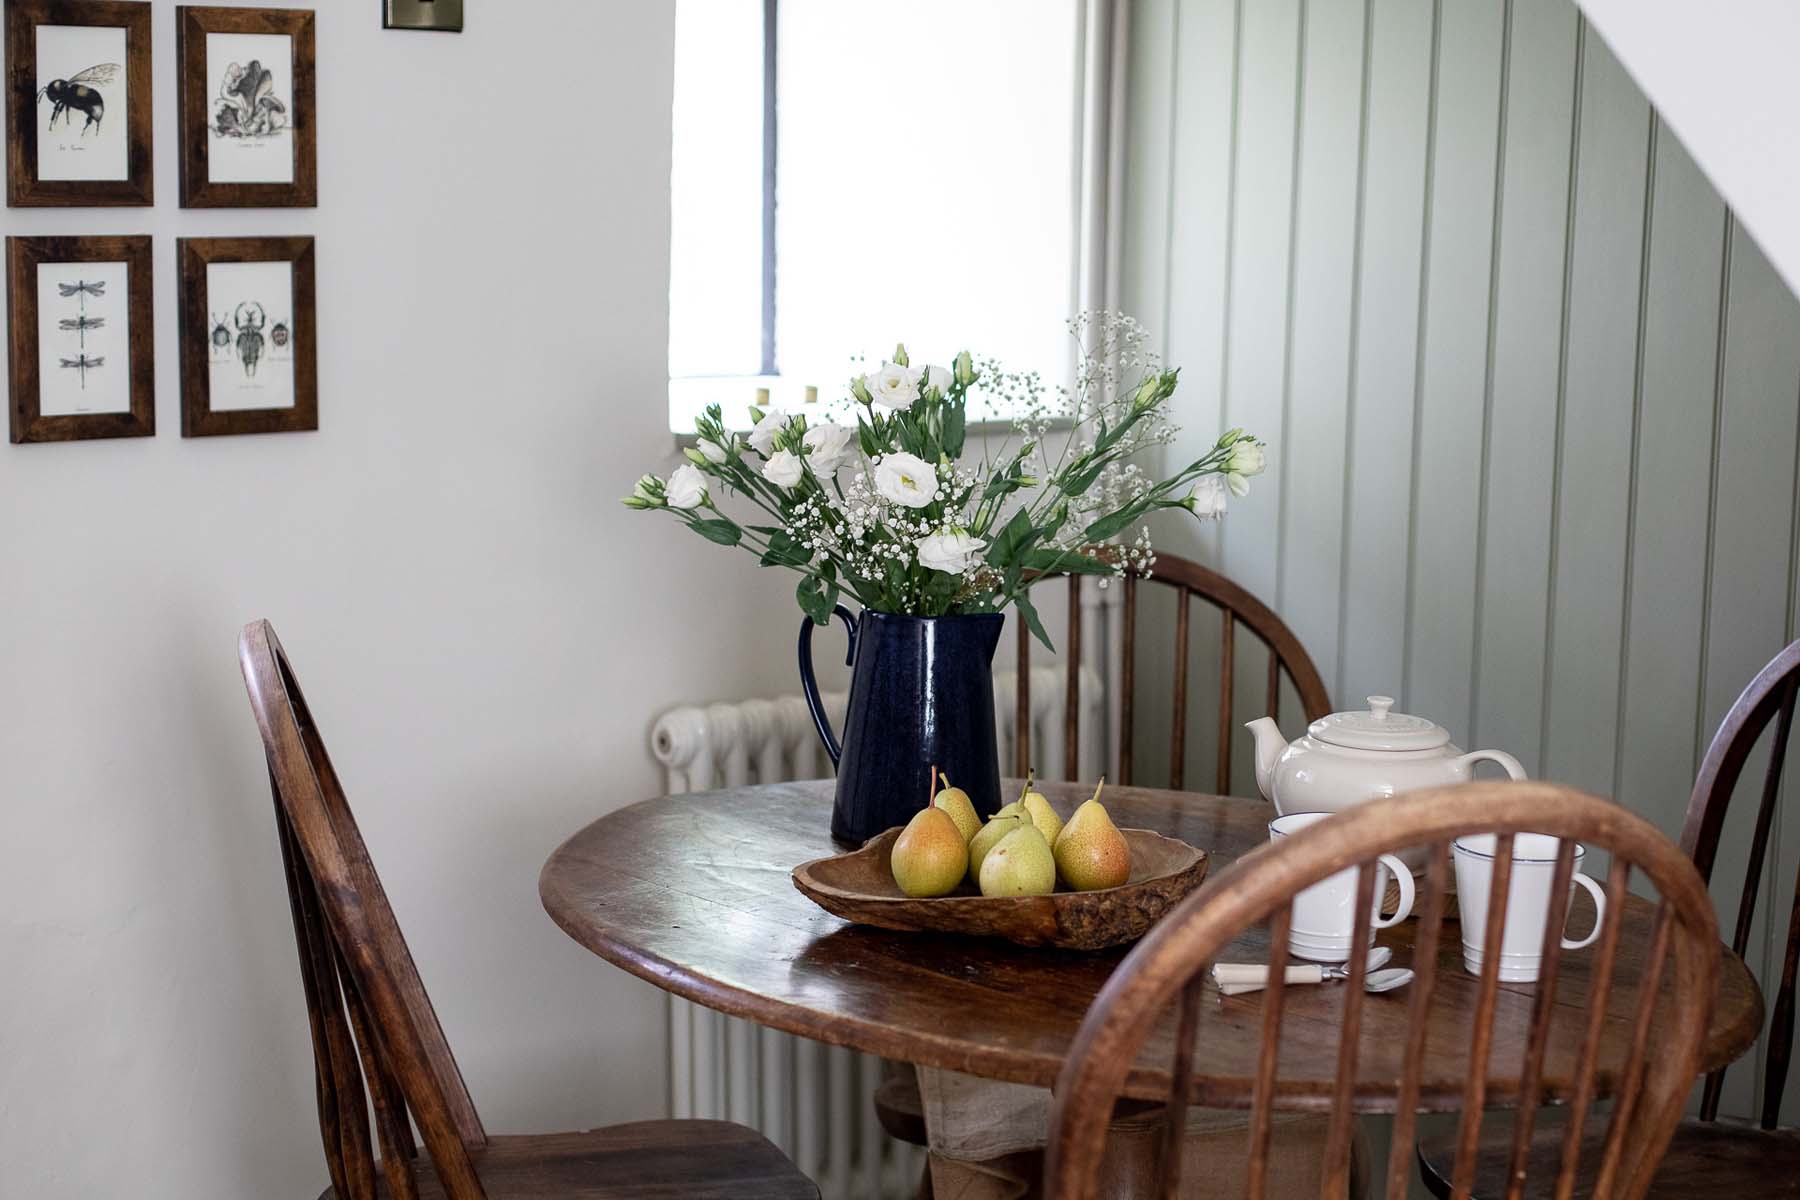 wooden dining table with flowers and pears